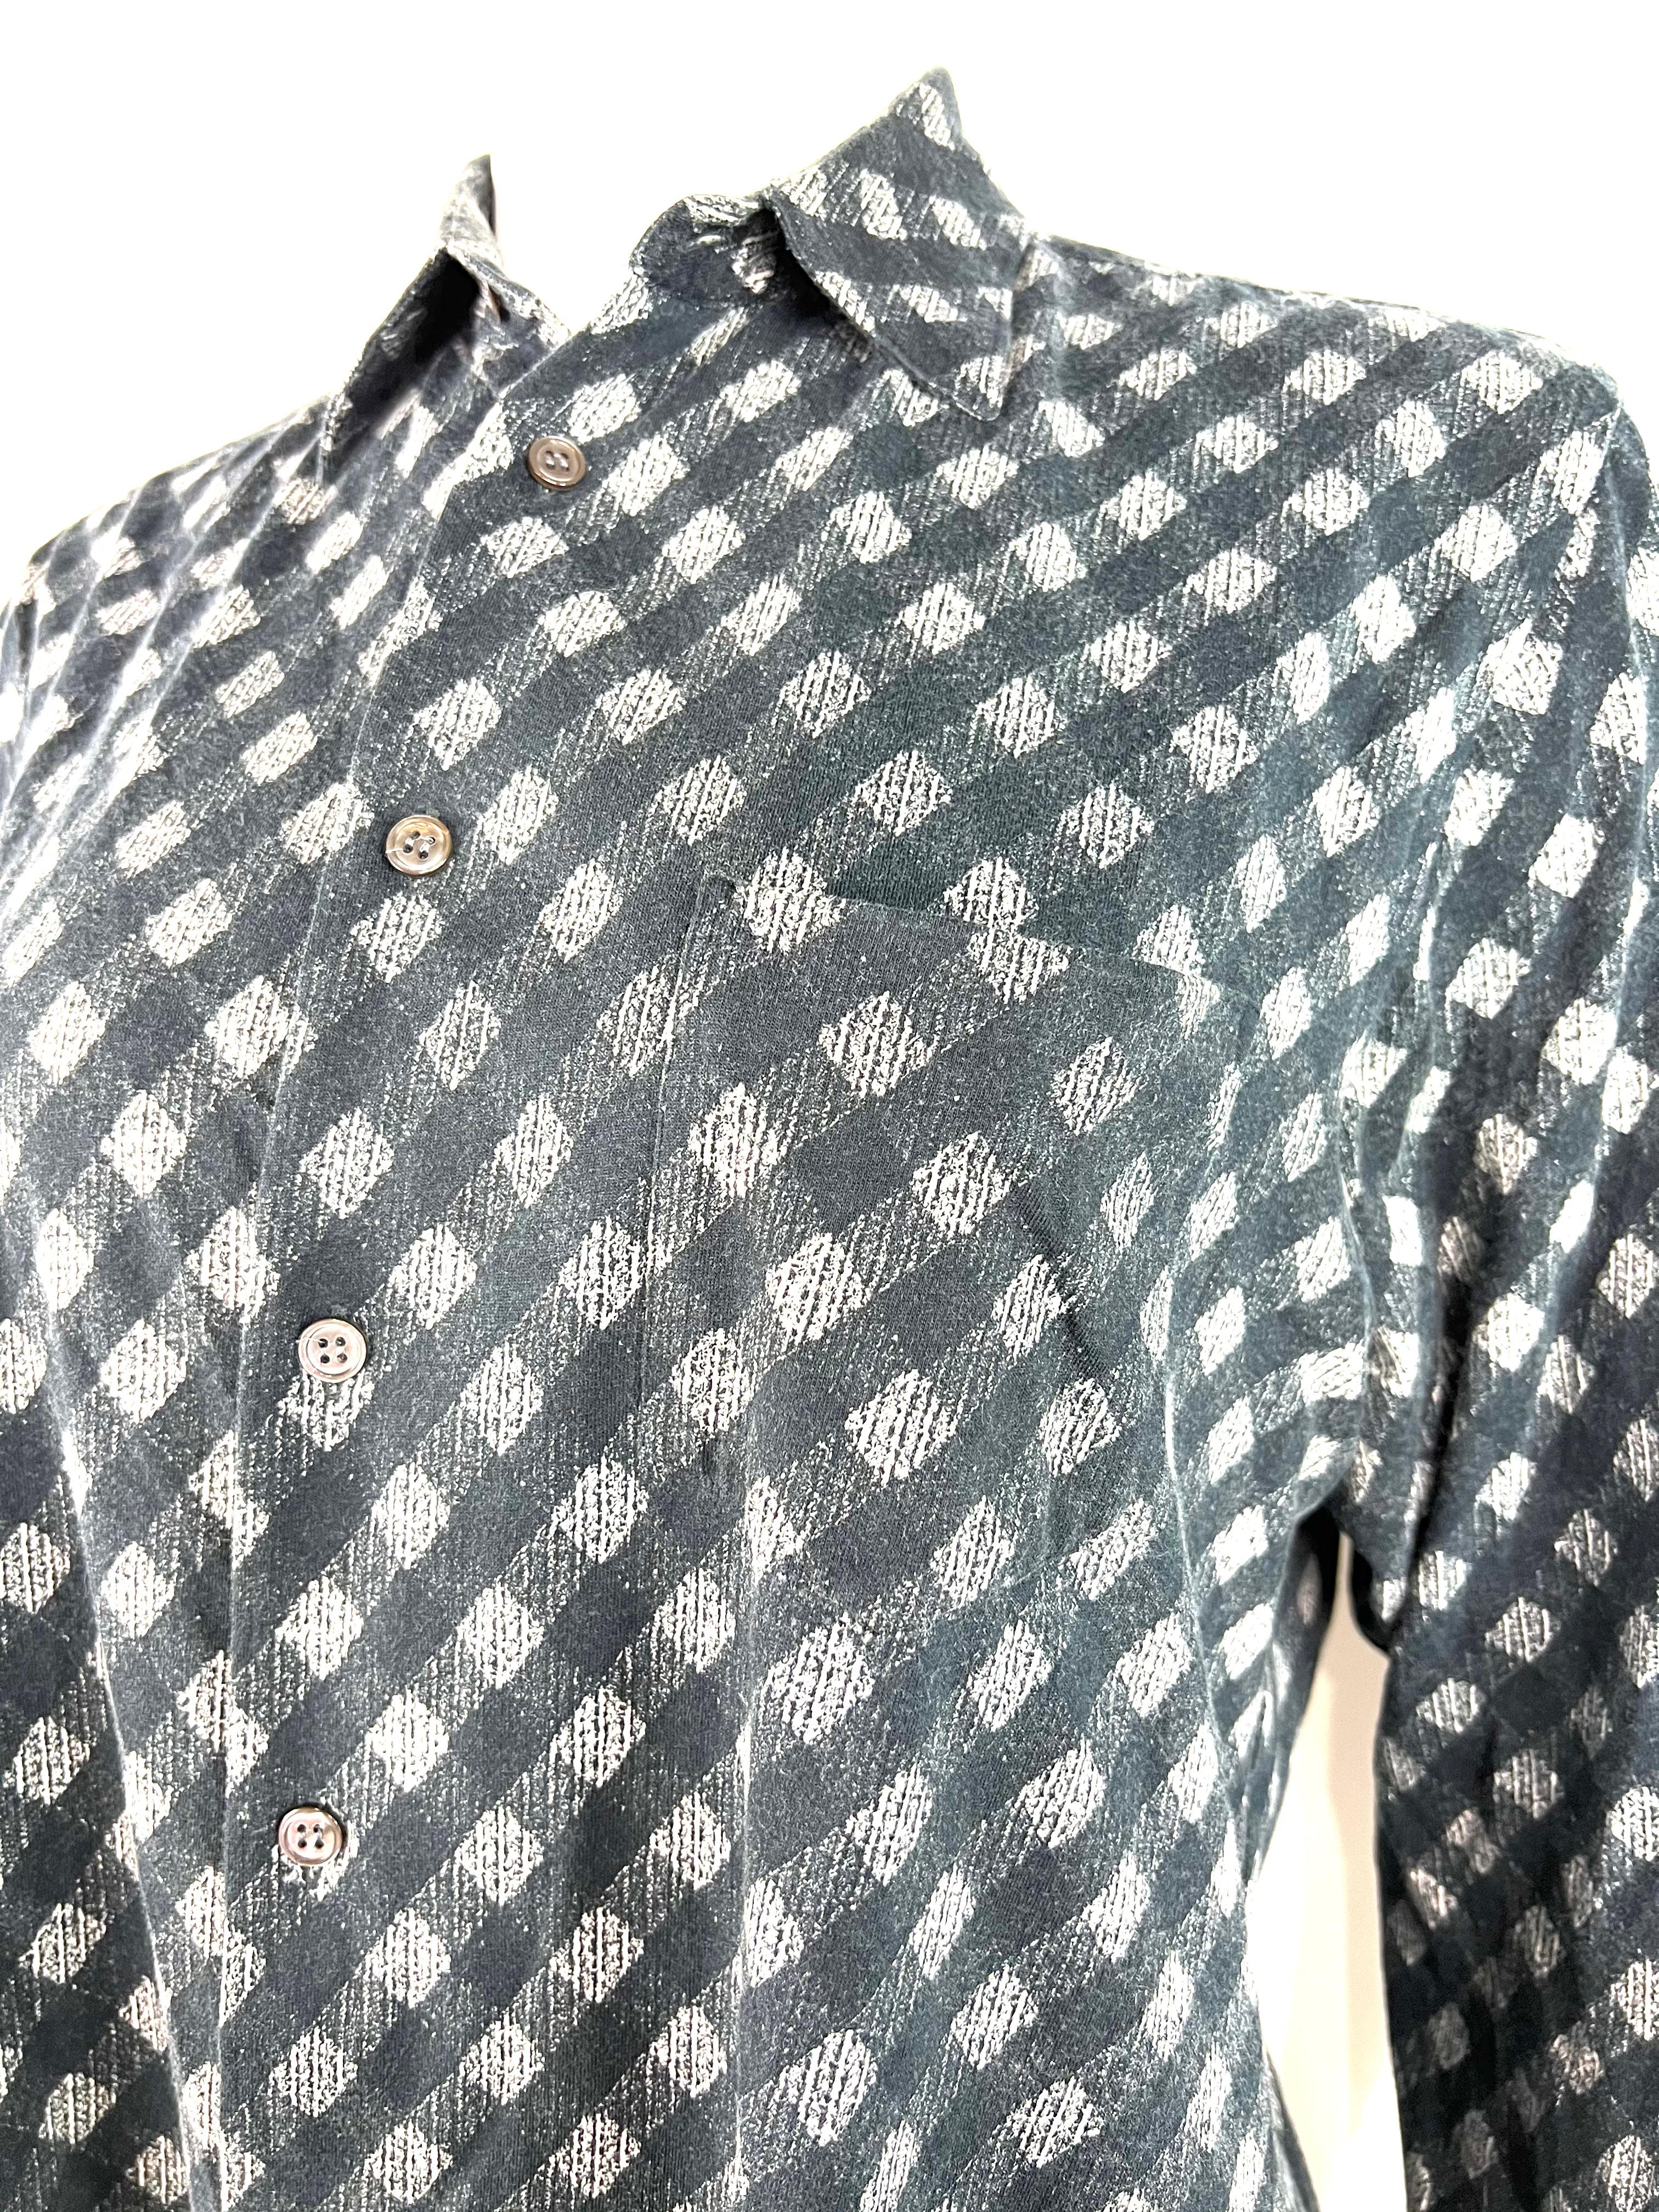 Product details:

The shirt features black and white pattern design, front button closure and side pocket detail. Made in France.